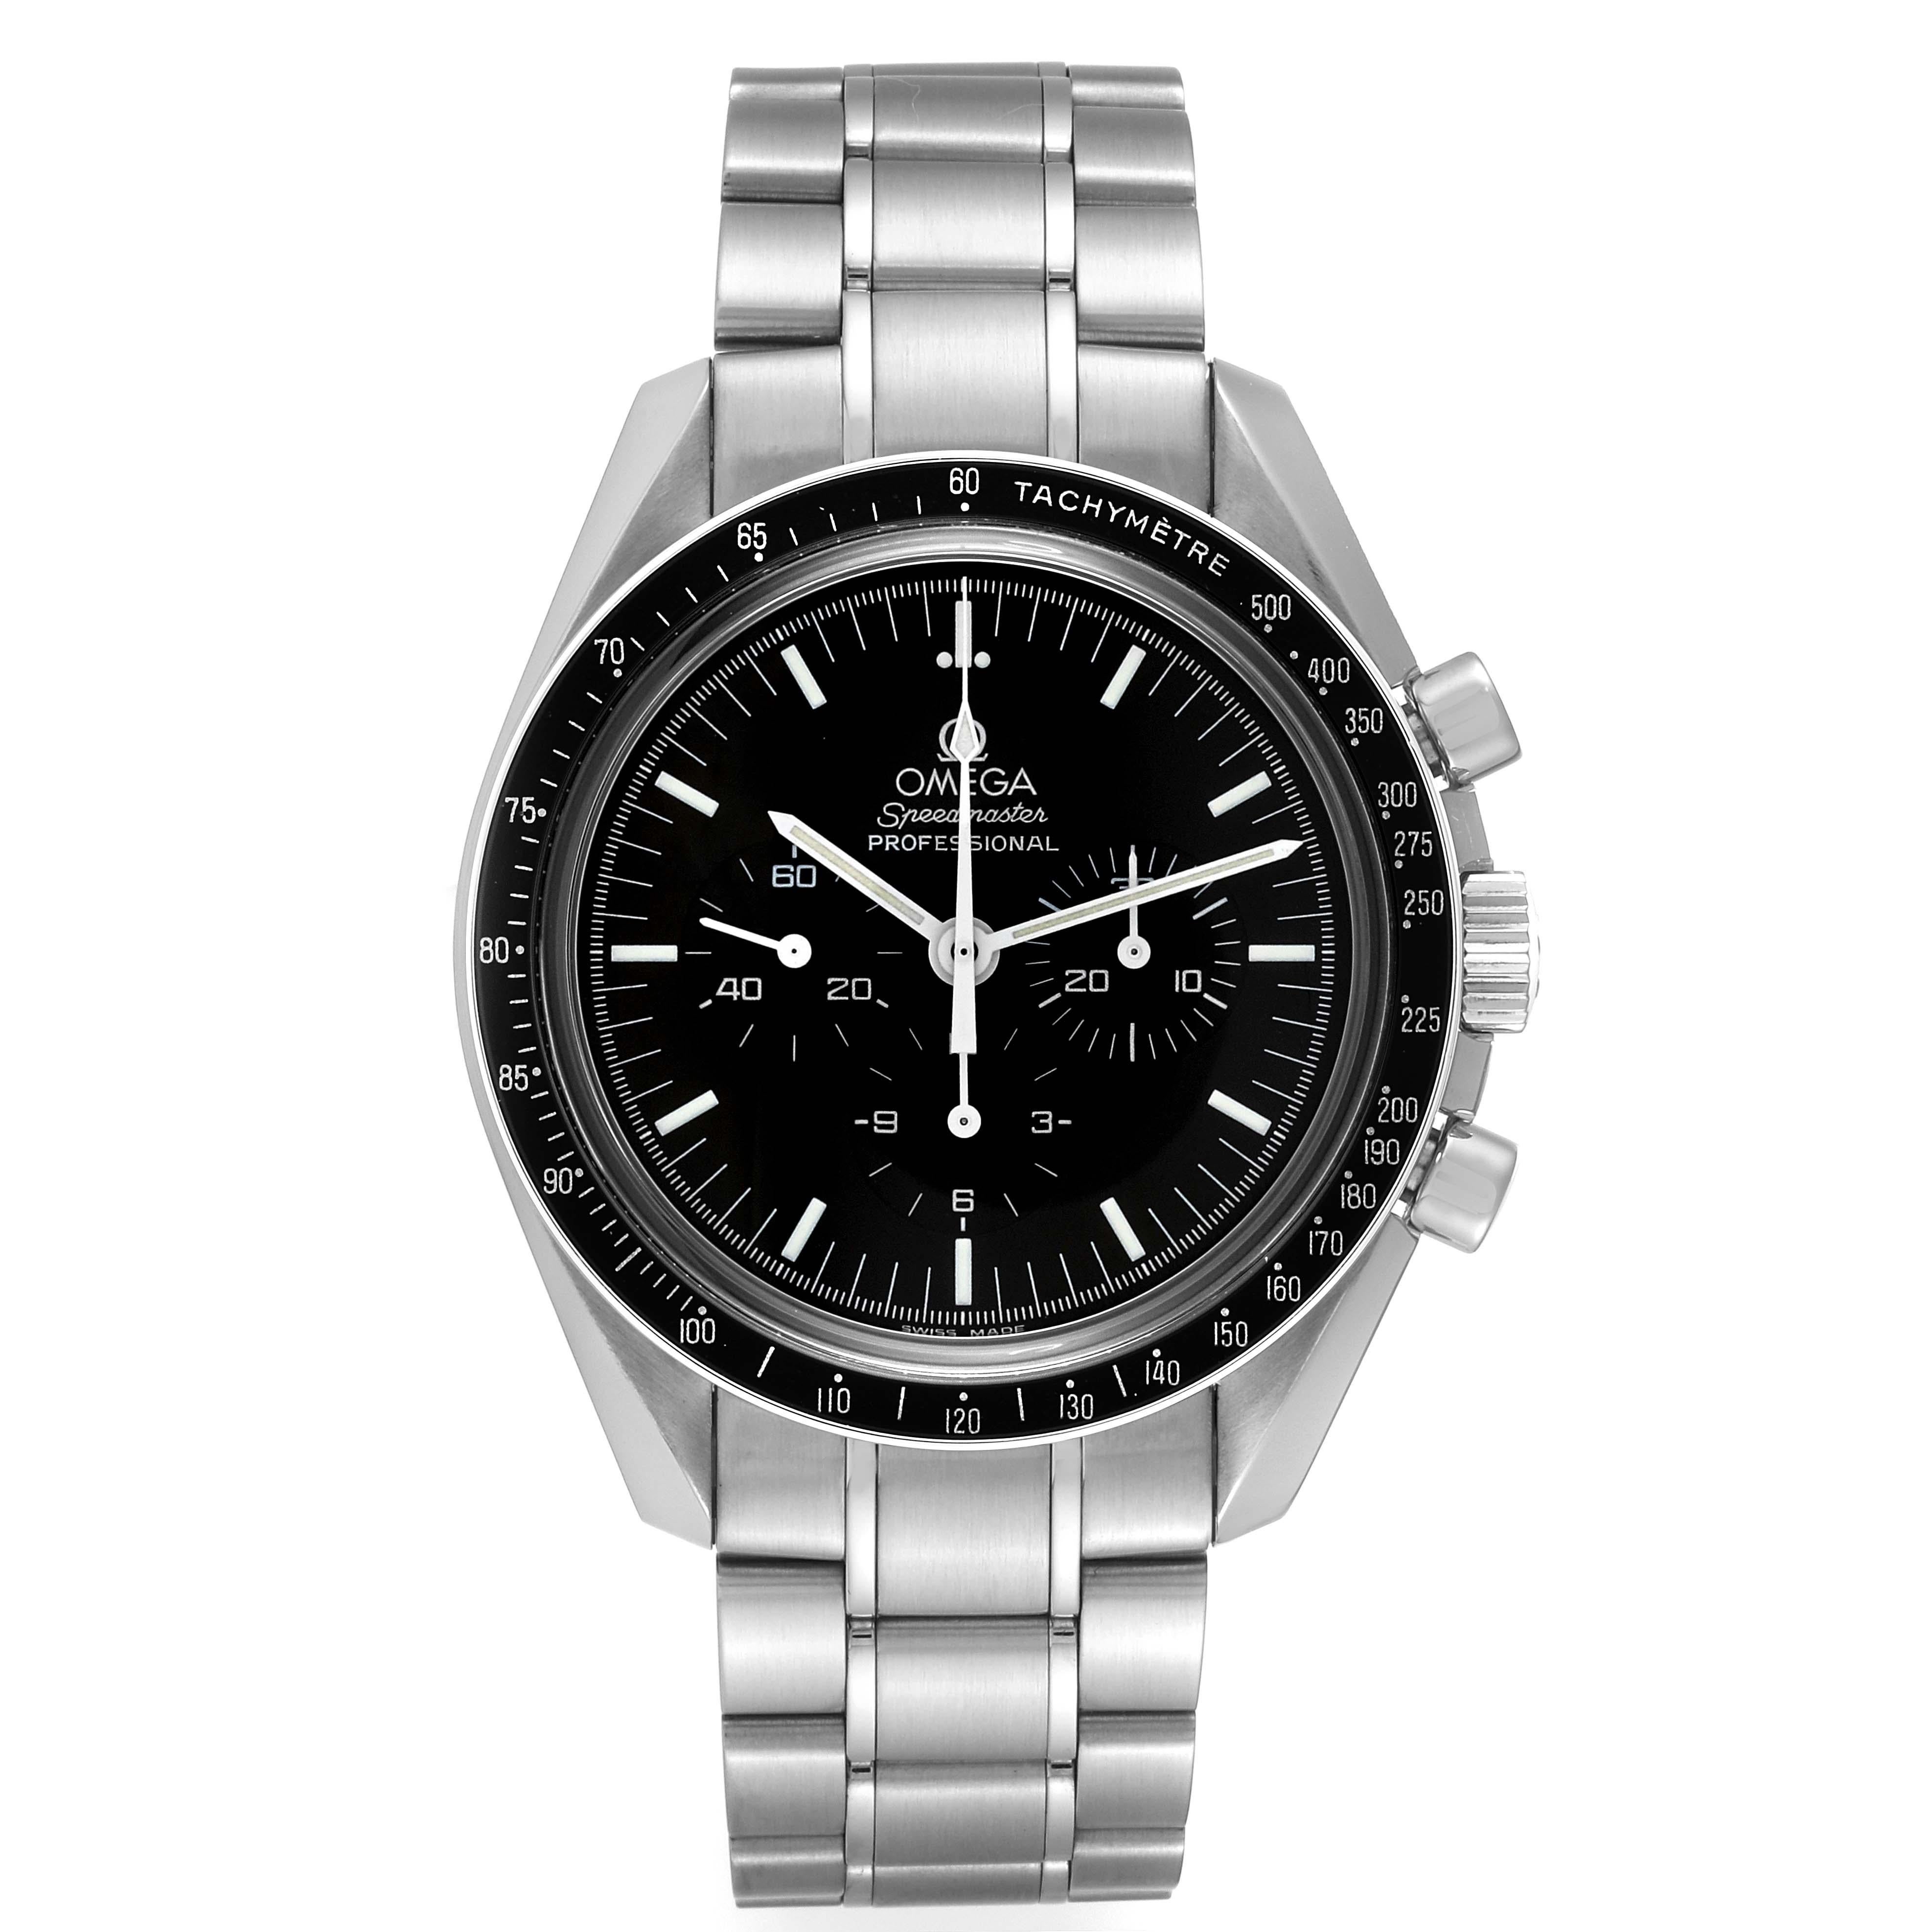 Omega Speedmaster Sapphire Sandwich Steel Mens MoonWatch 3573.50.00. Manual winding chronograph movement. Caliber 1863. Stainless steel round case 42.0 mm in diameter. Transparent exhibition sapphire crystal caseback. Stainless steel bezel with